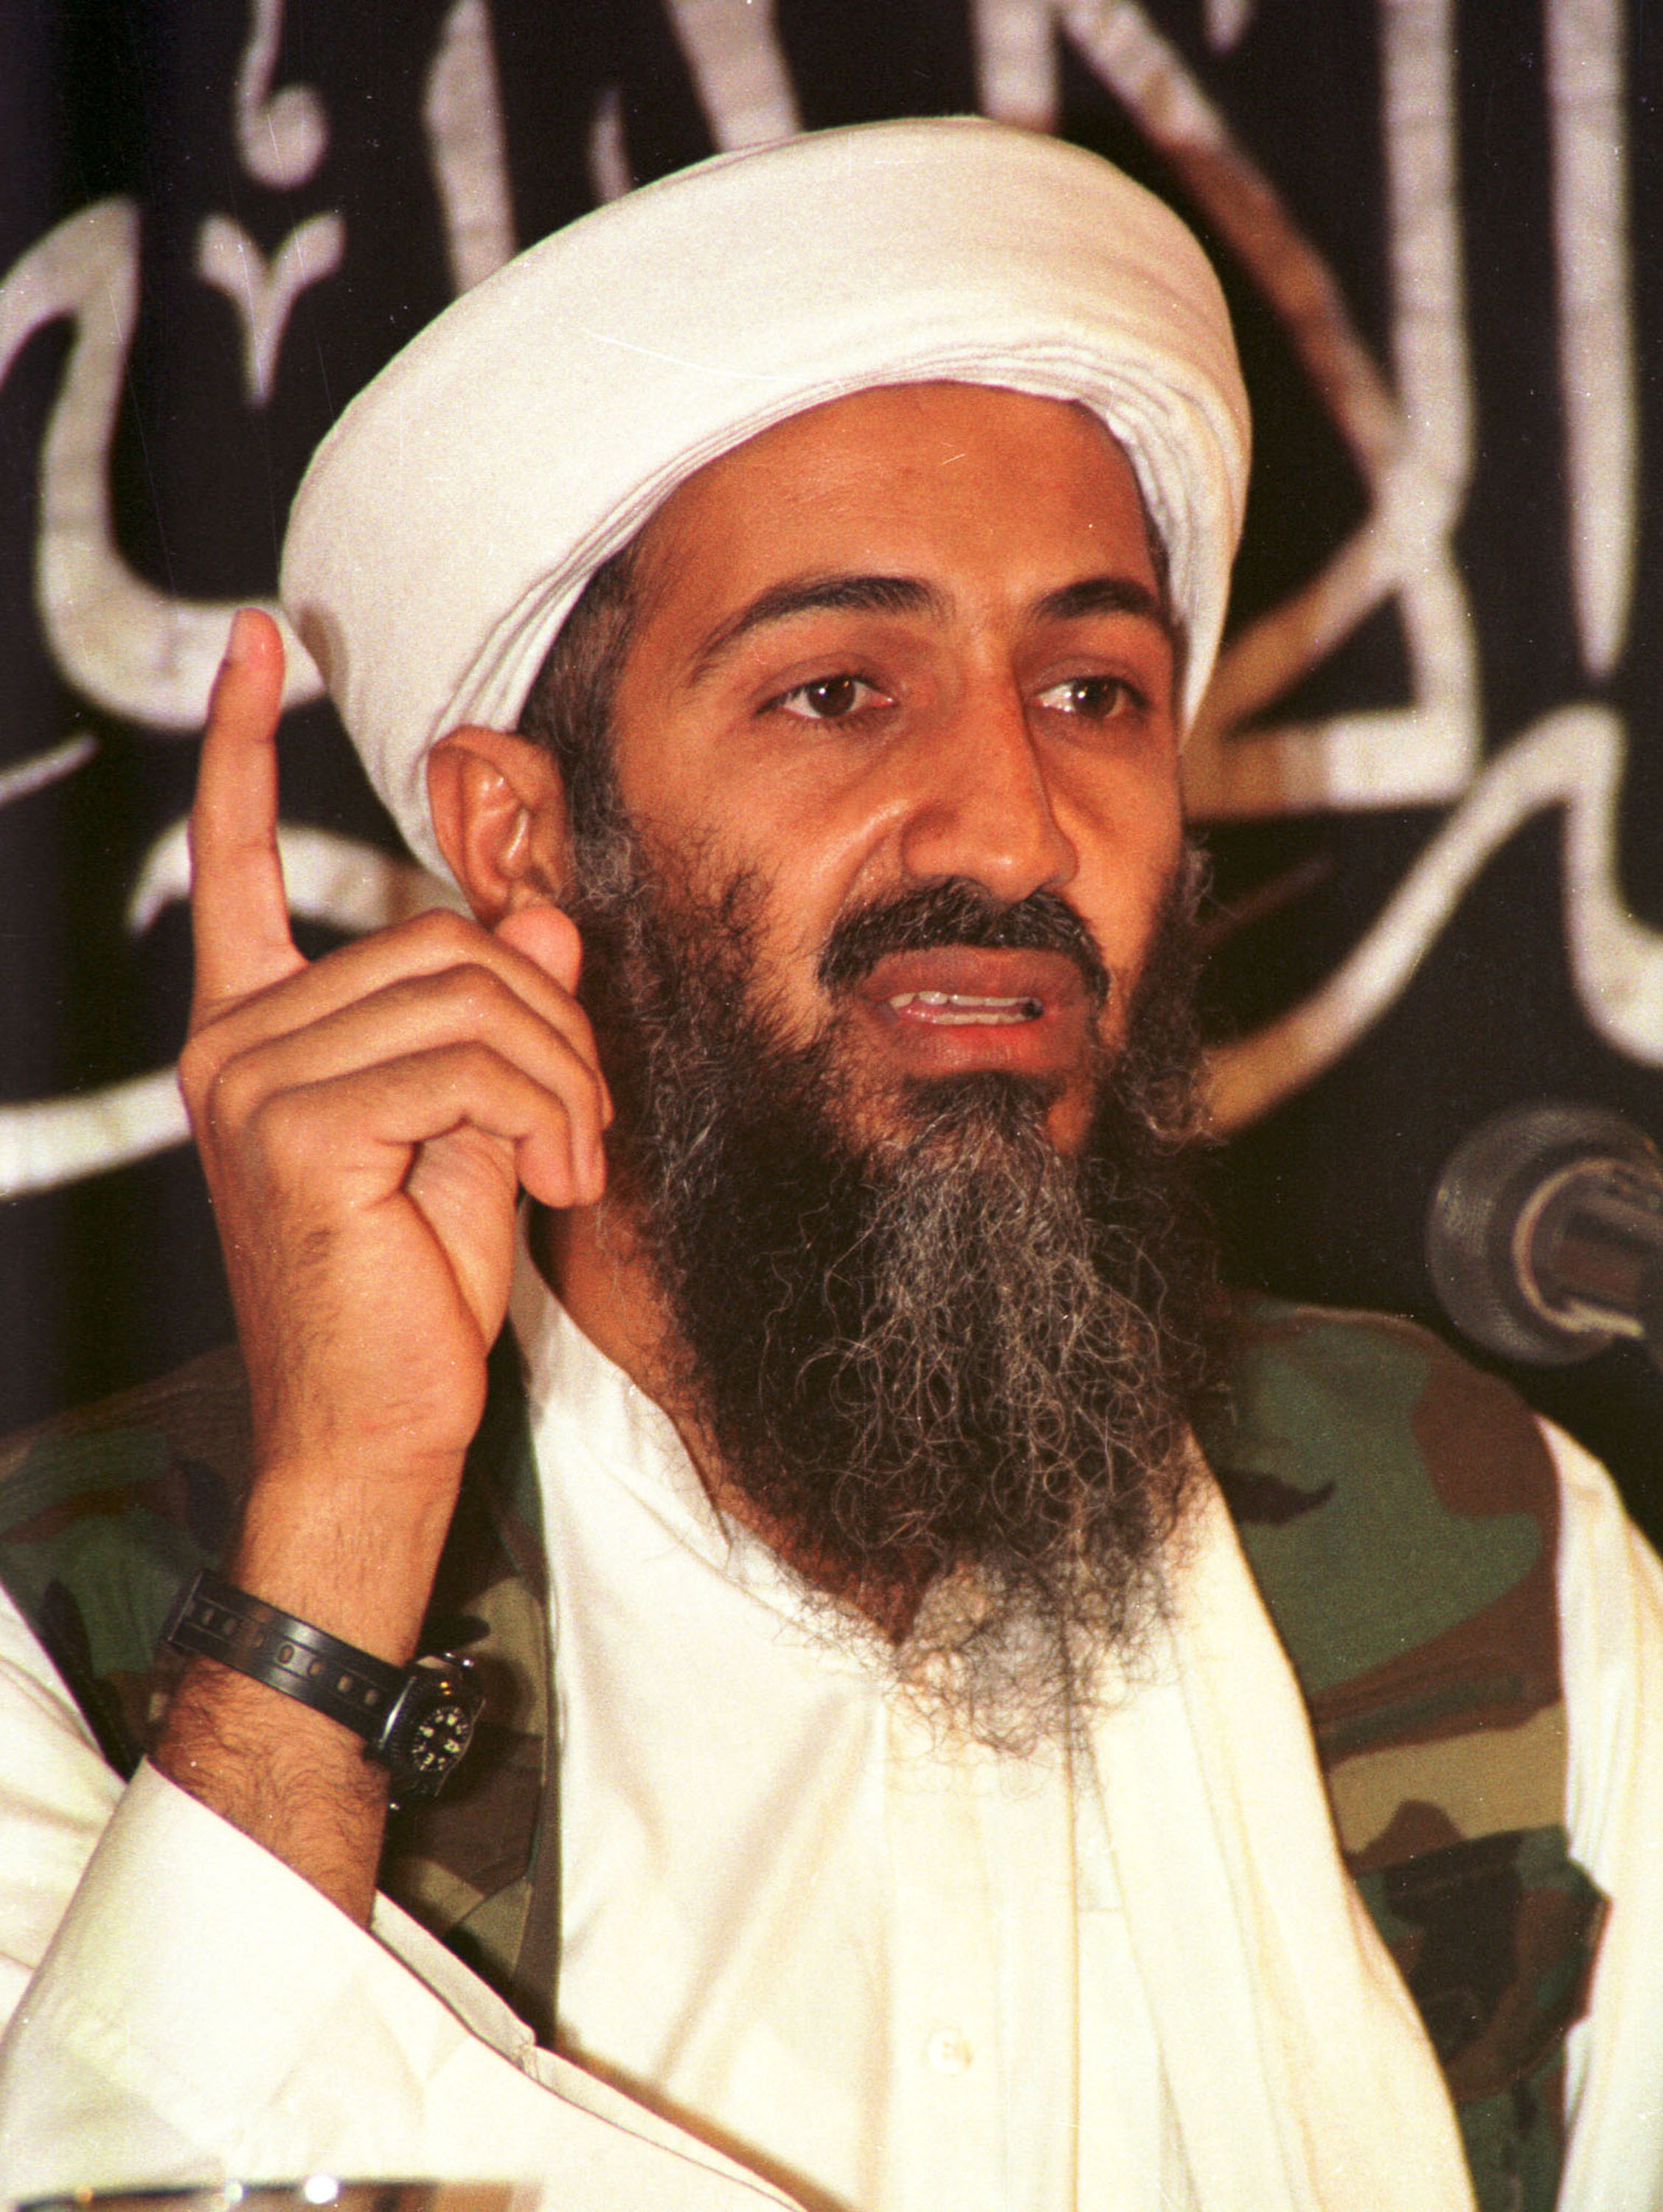 $25 million: Osama bin-Laden was the founder of al-Qaeda, the militant Islamist organization that was responsible for the September 11, 2001 attacks on the U.S.  Bin-Laden was killed in Pakistan on May 2, 2011 by an American Special Forces unit in an operation ordered by President Obama.